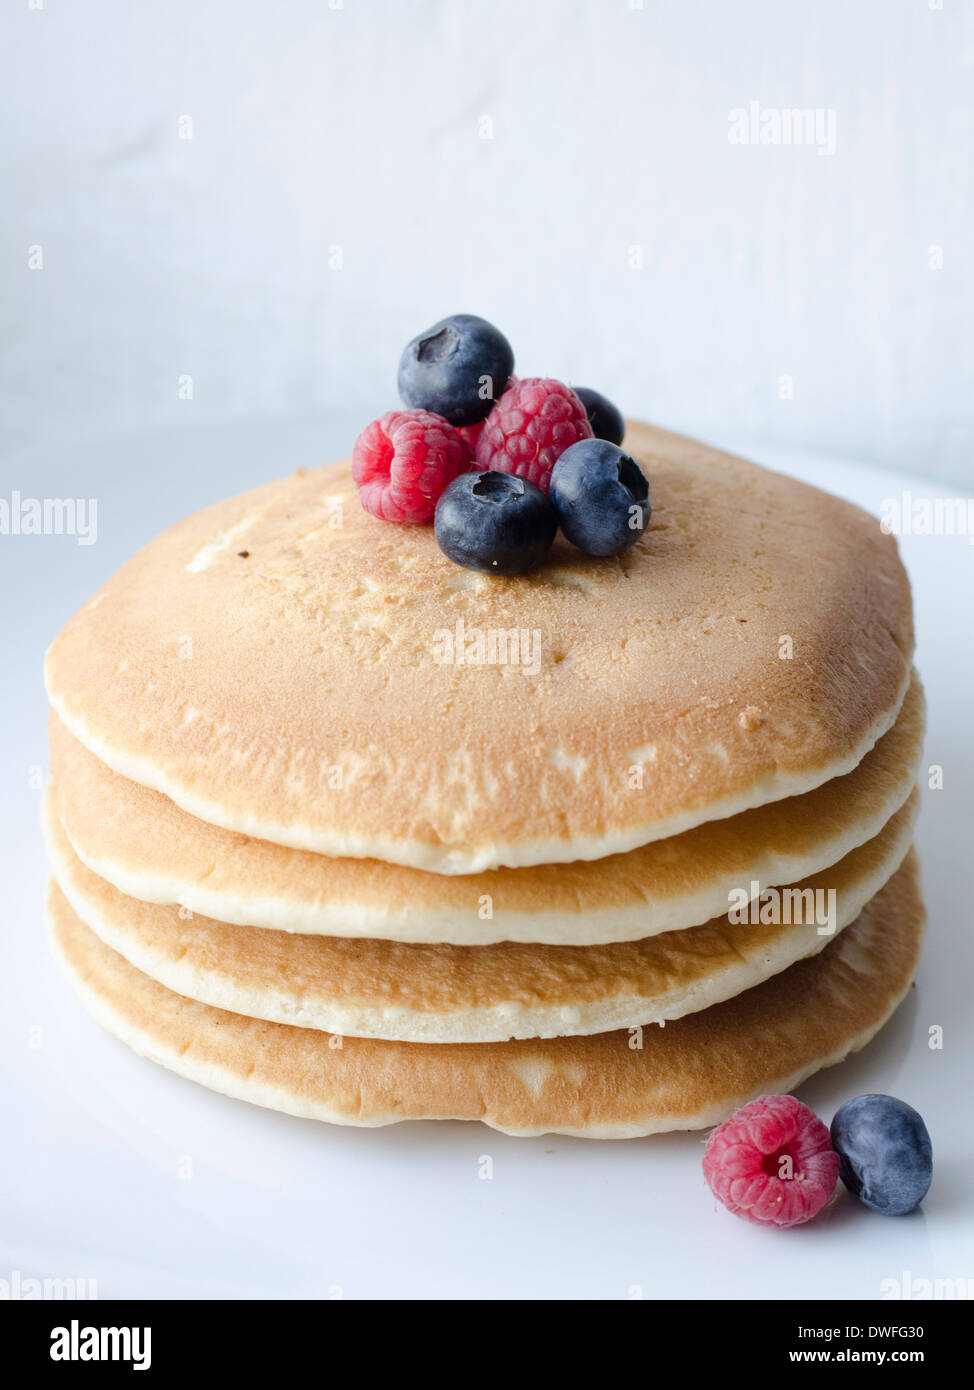 Amercian style pankcakes with raspberries and blueberries on top. Stock Photo